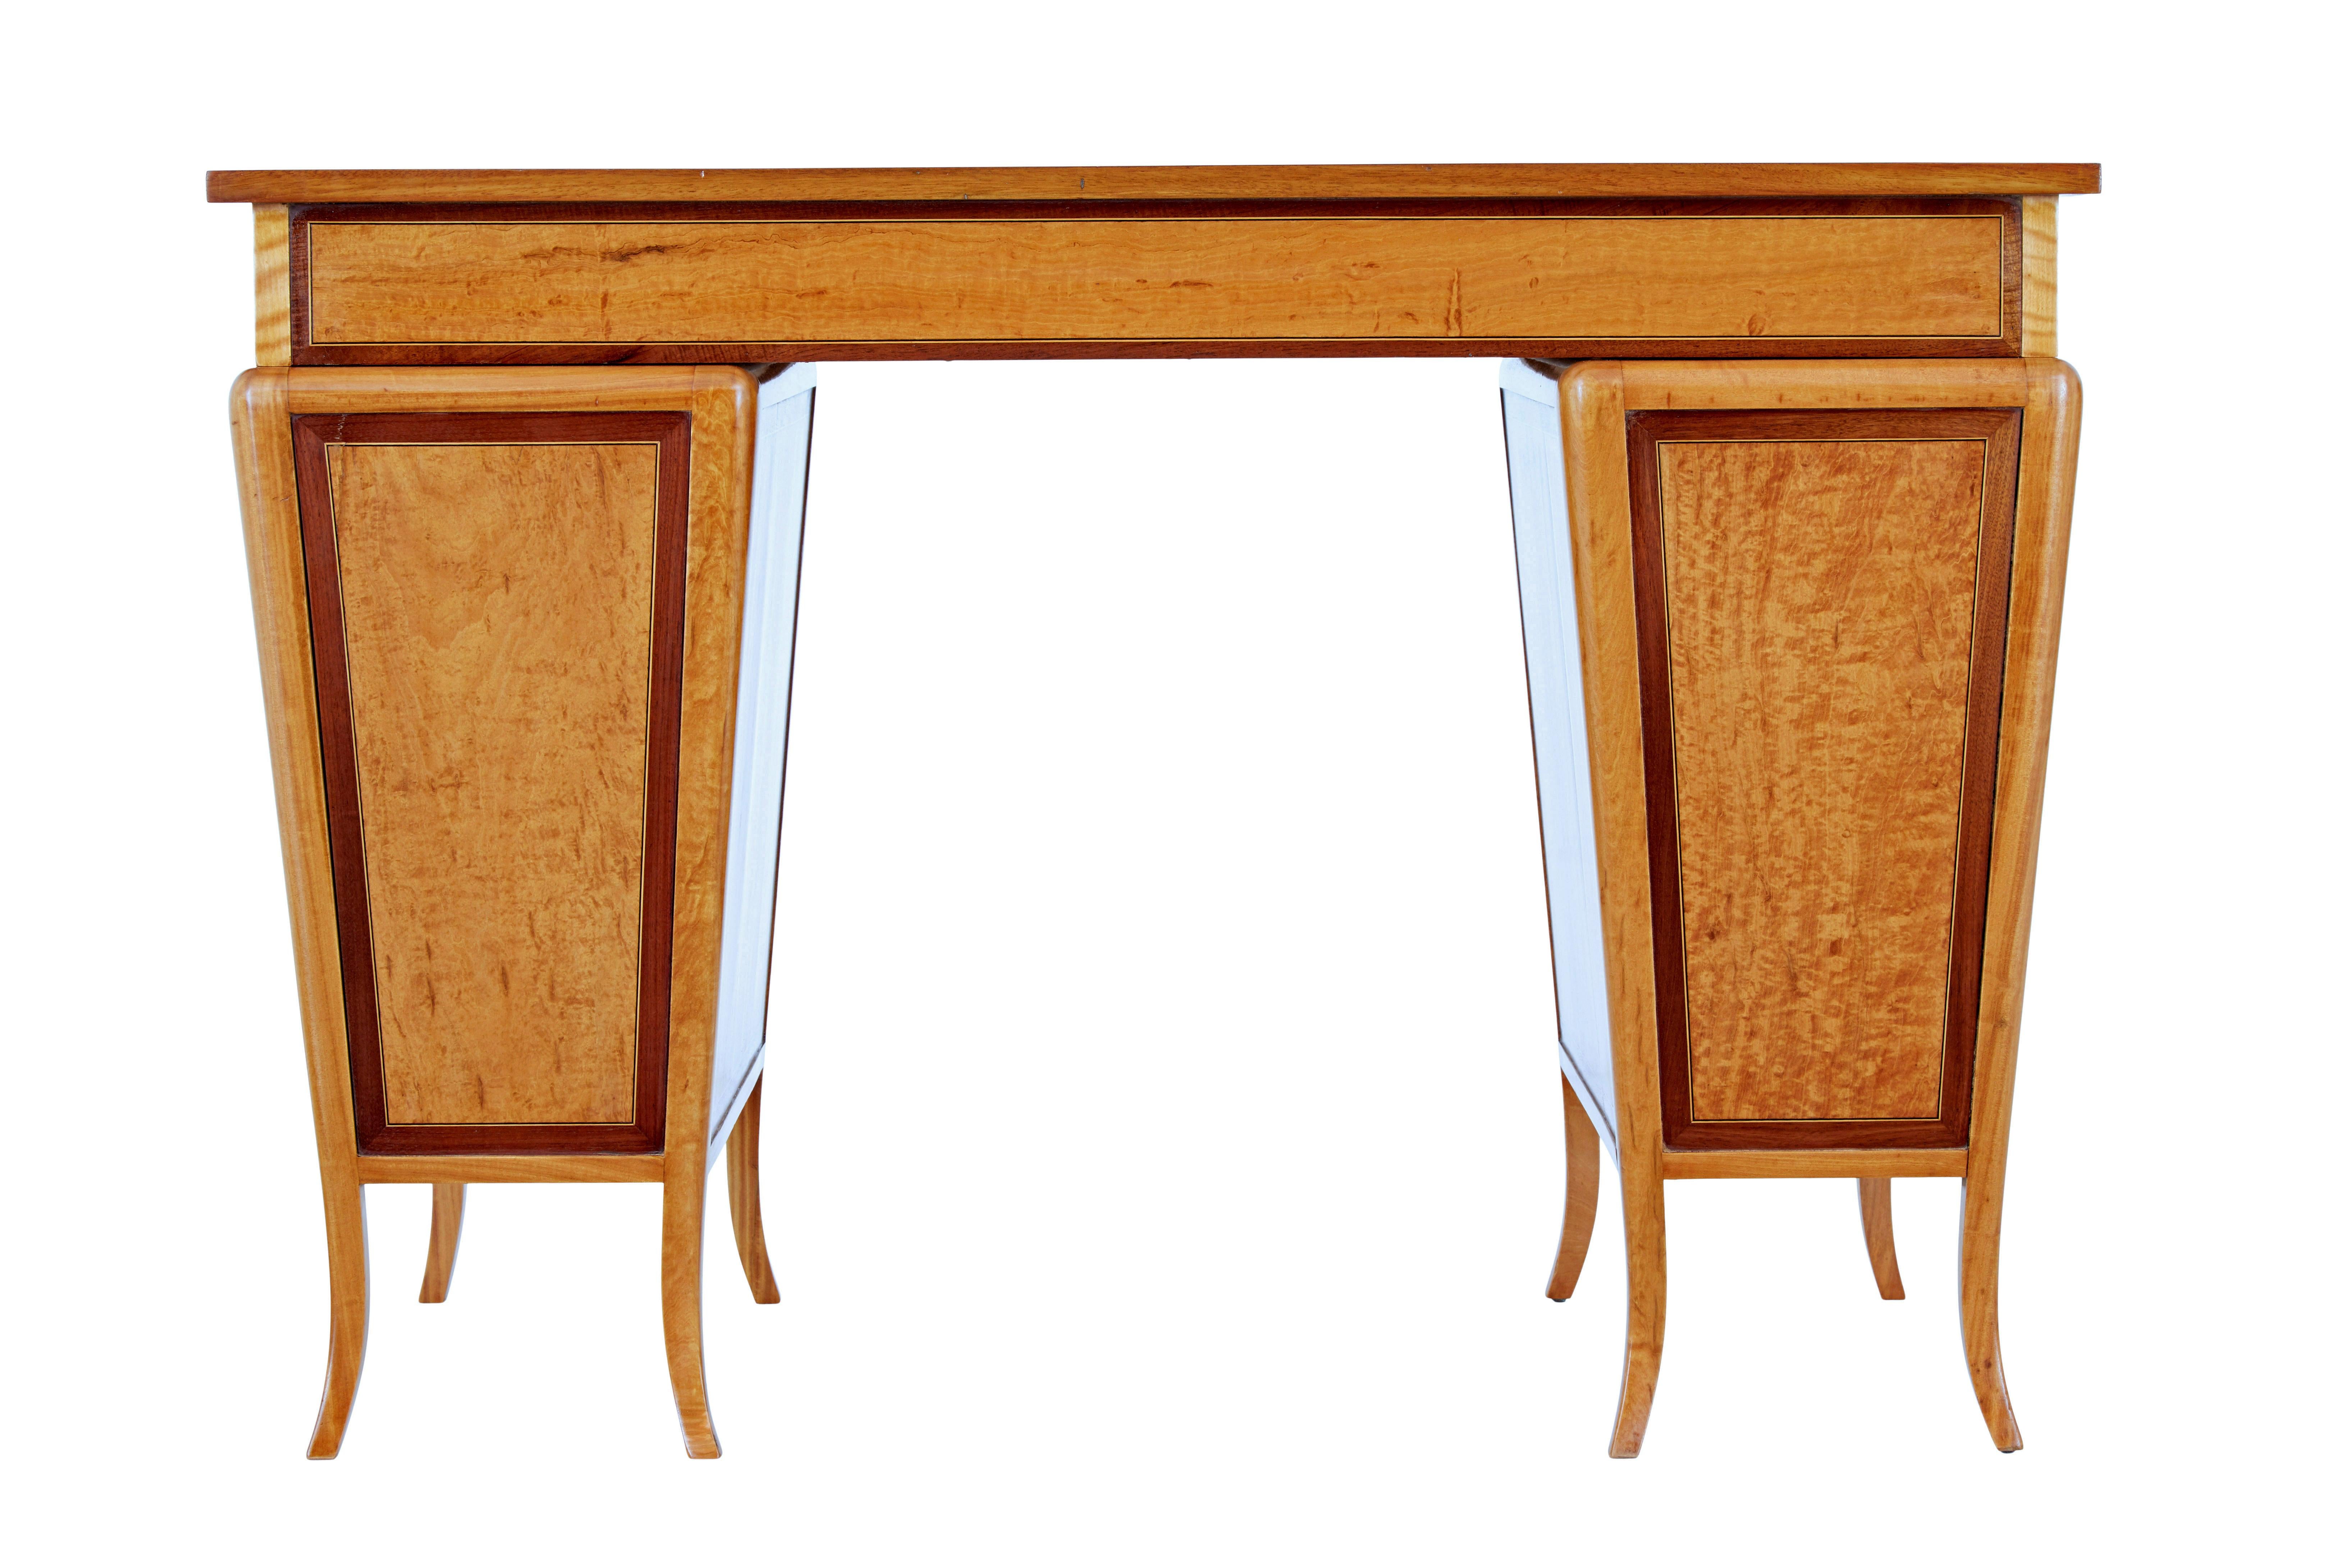 Hand-Carved Early 20th century satinwood sheraton revival desk For Sale